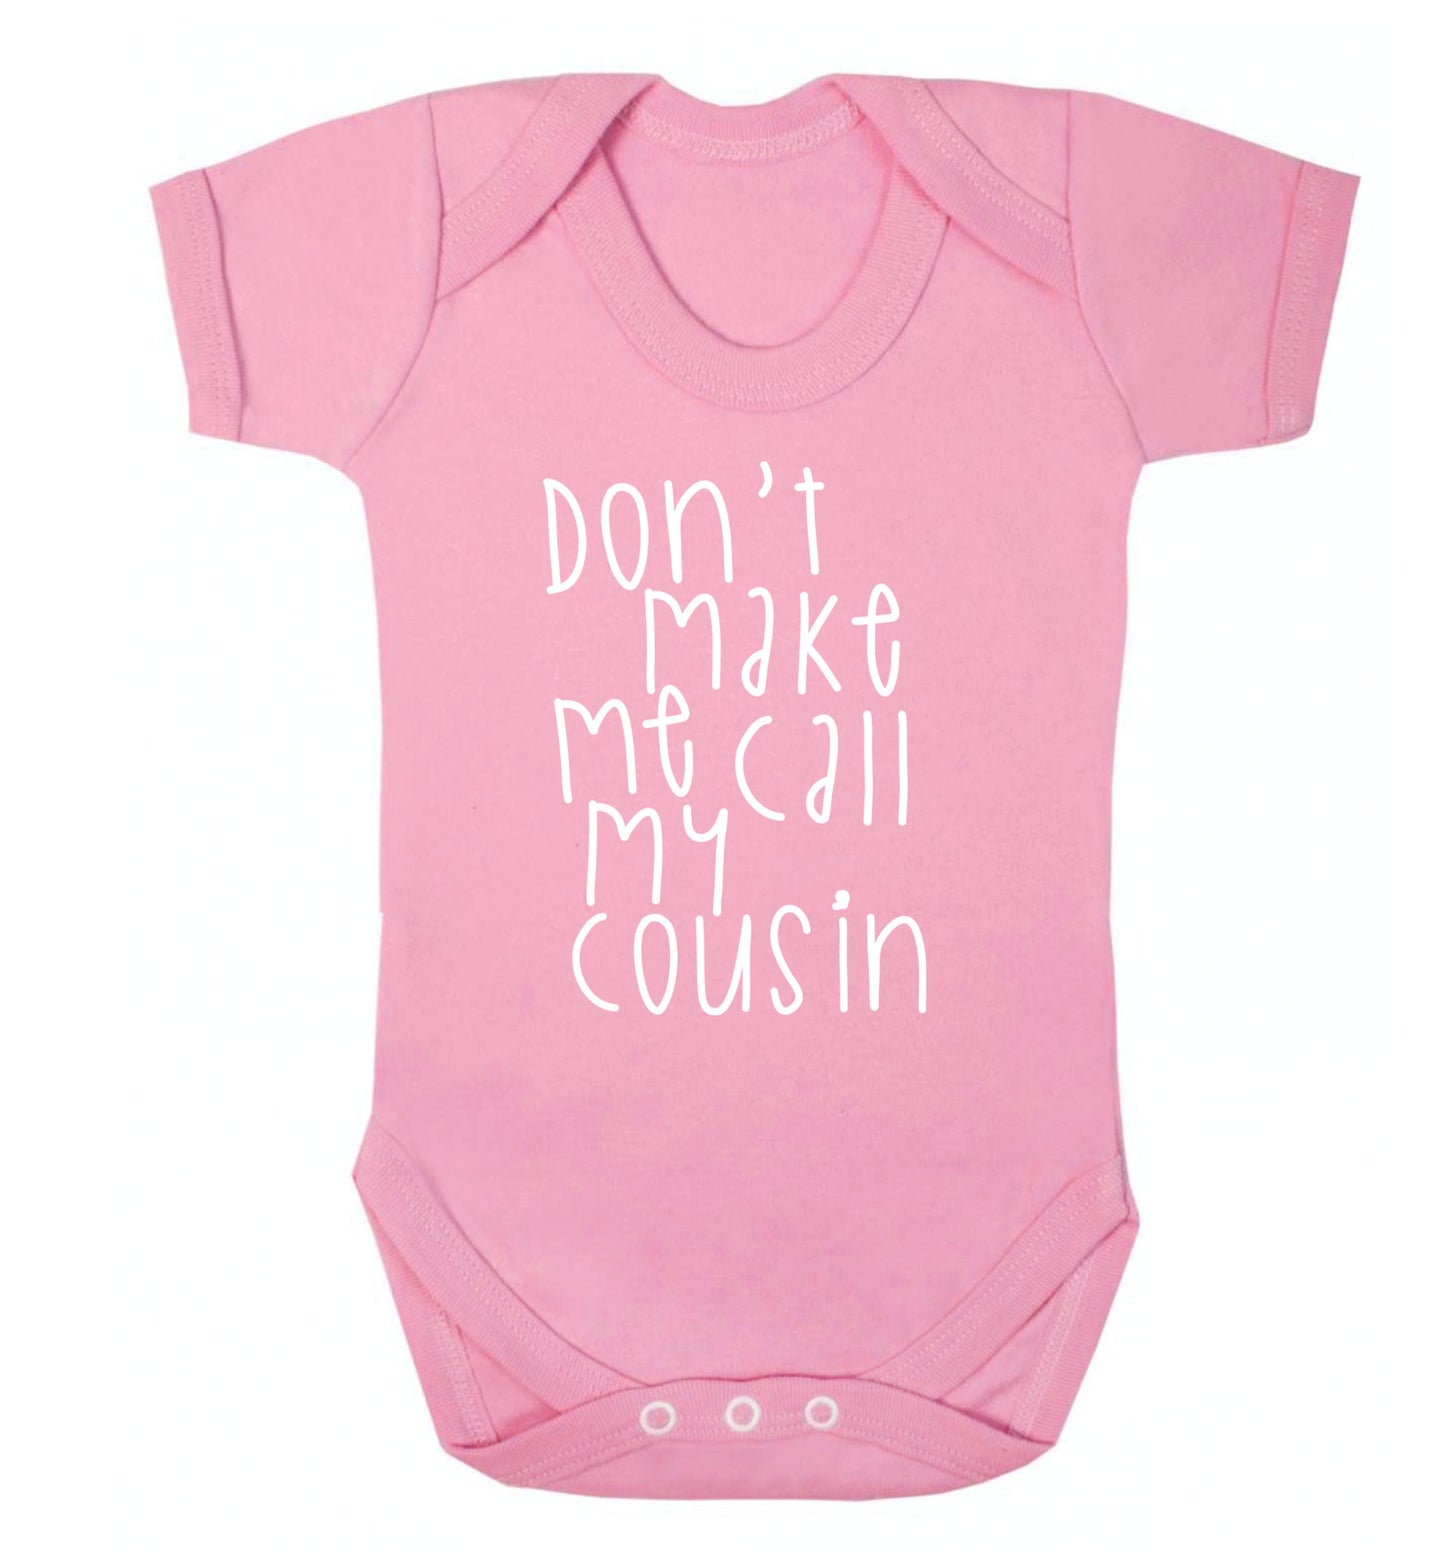 Don't make me call my cousin Baby Vest pale pink 18-24 months